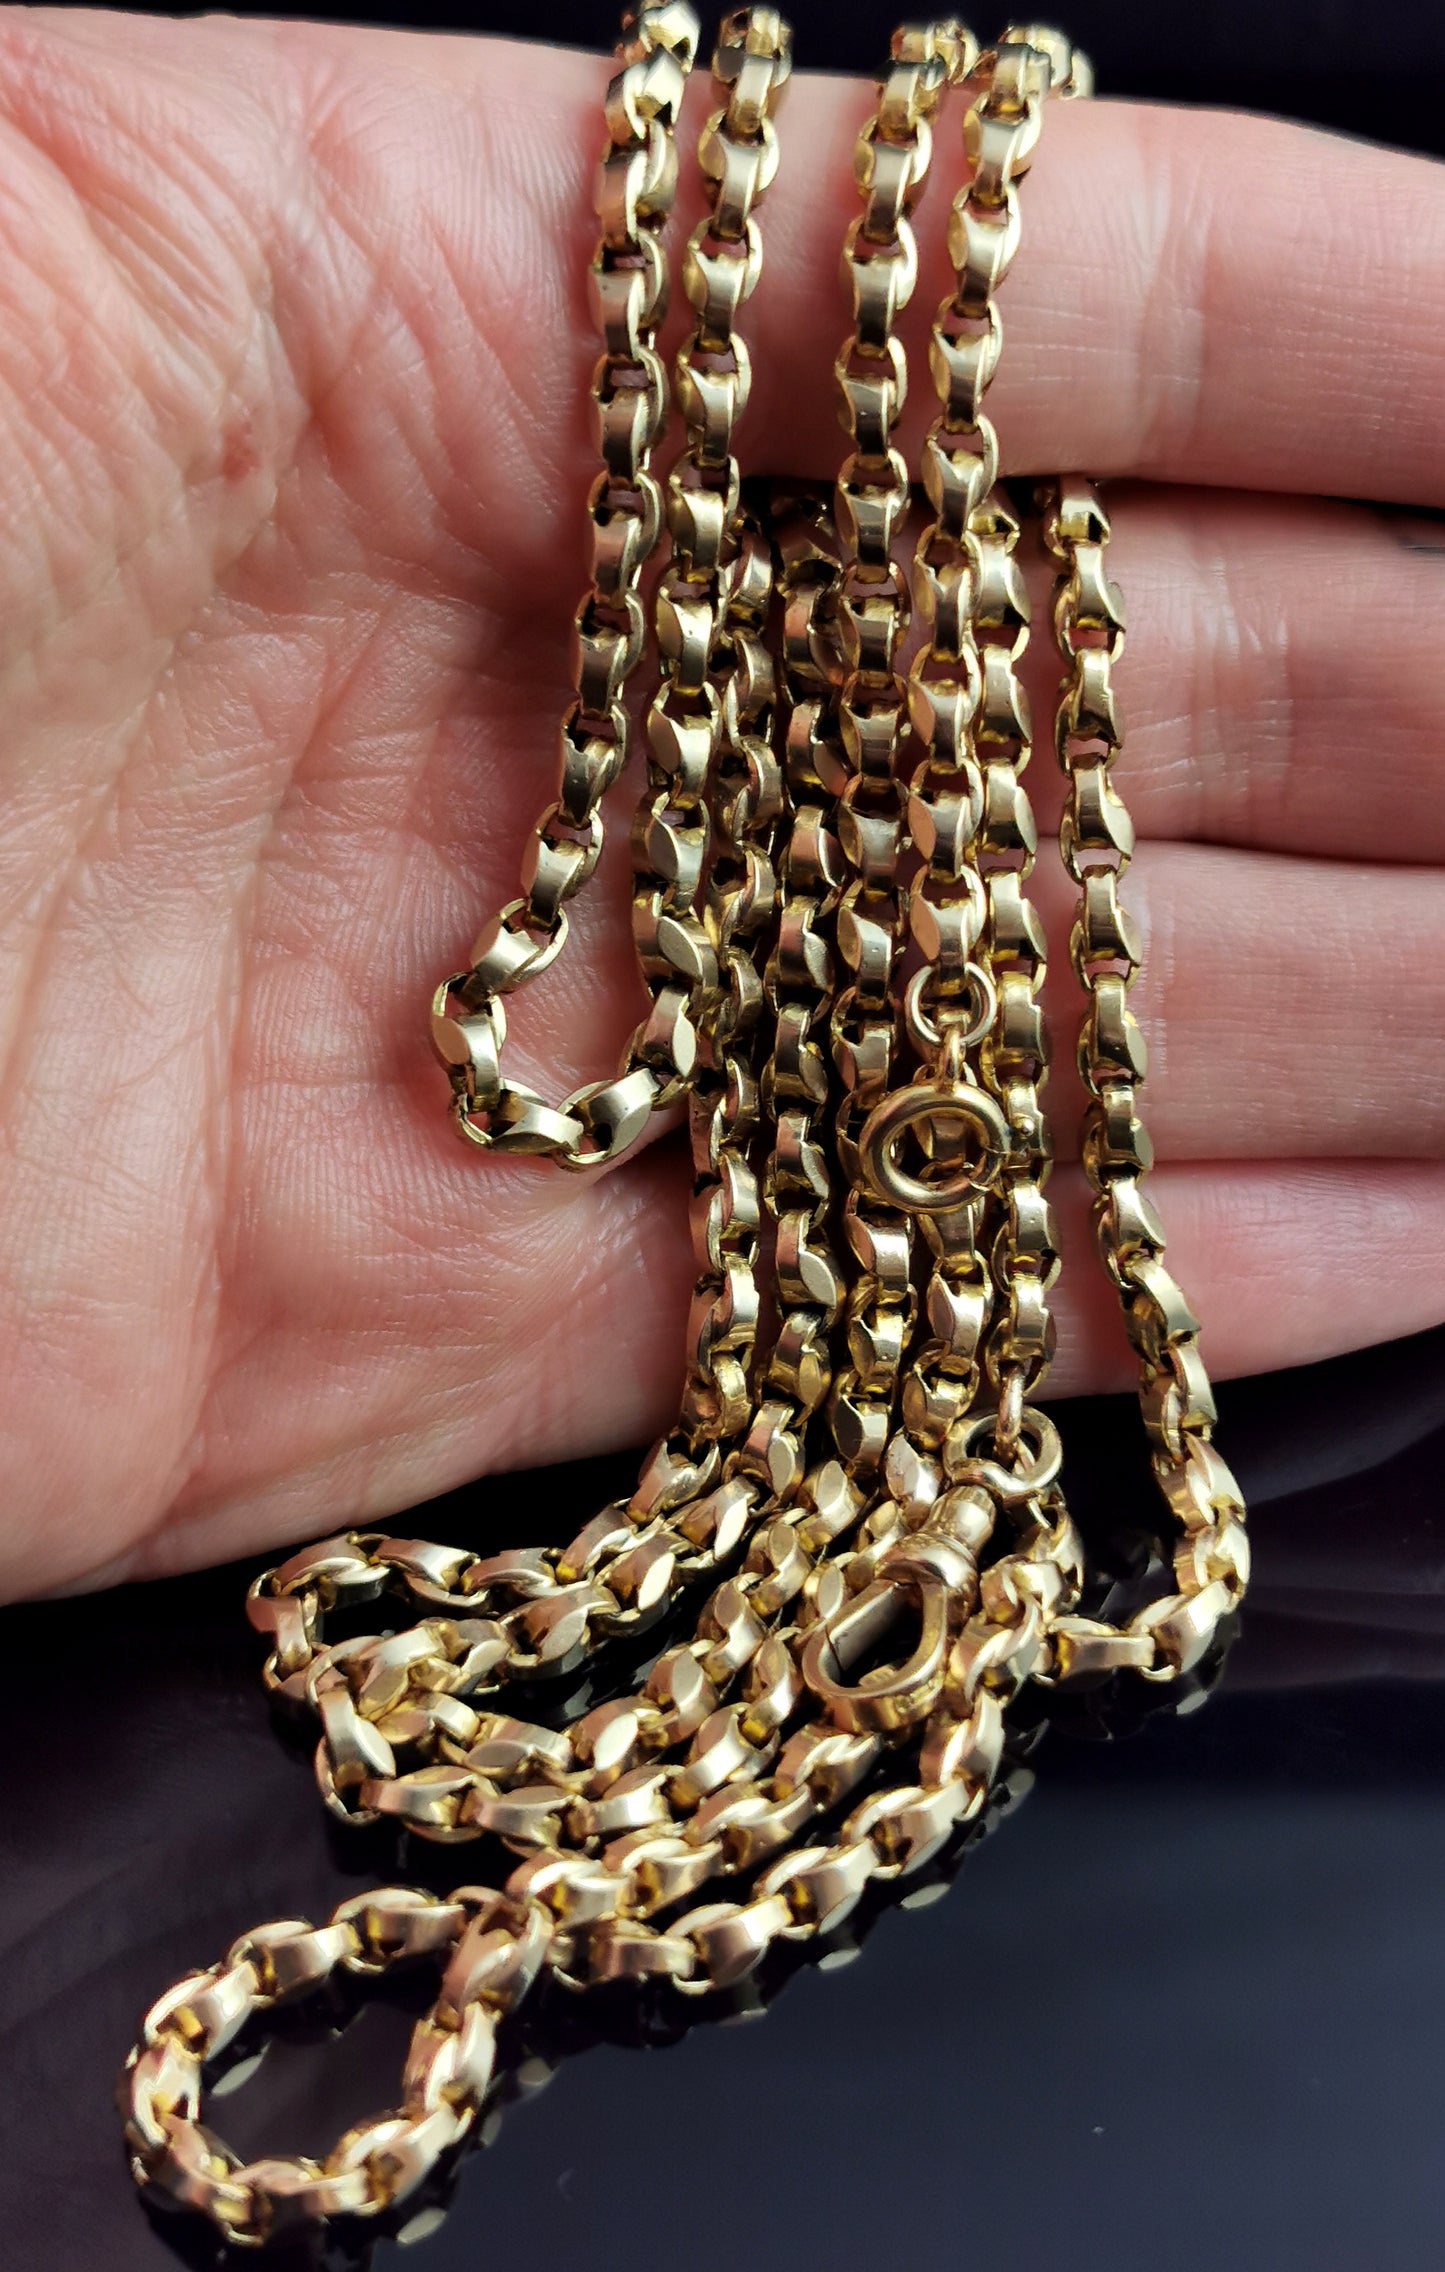 Antique 9ct gold longuard chain necklace, muff chain, fancy link